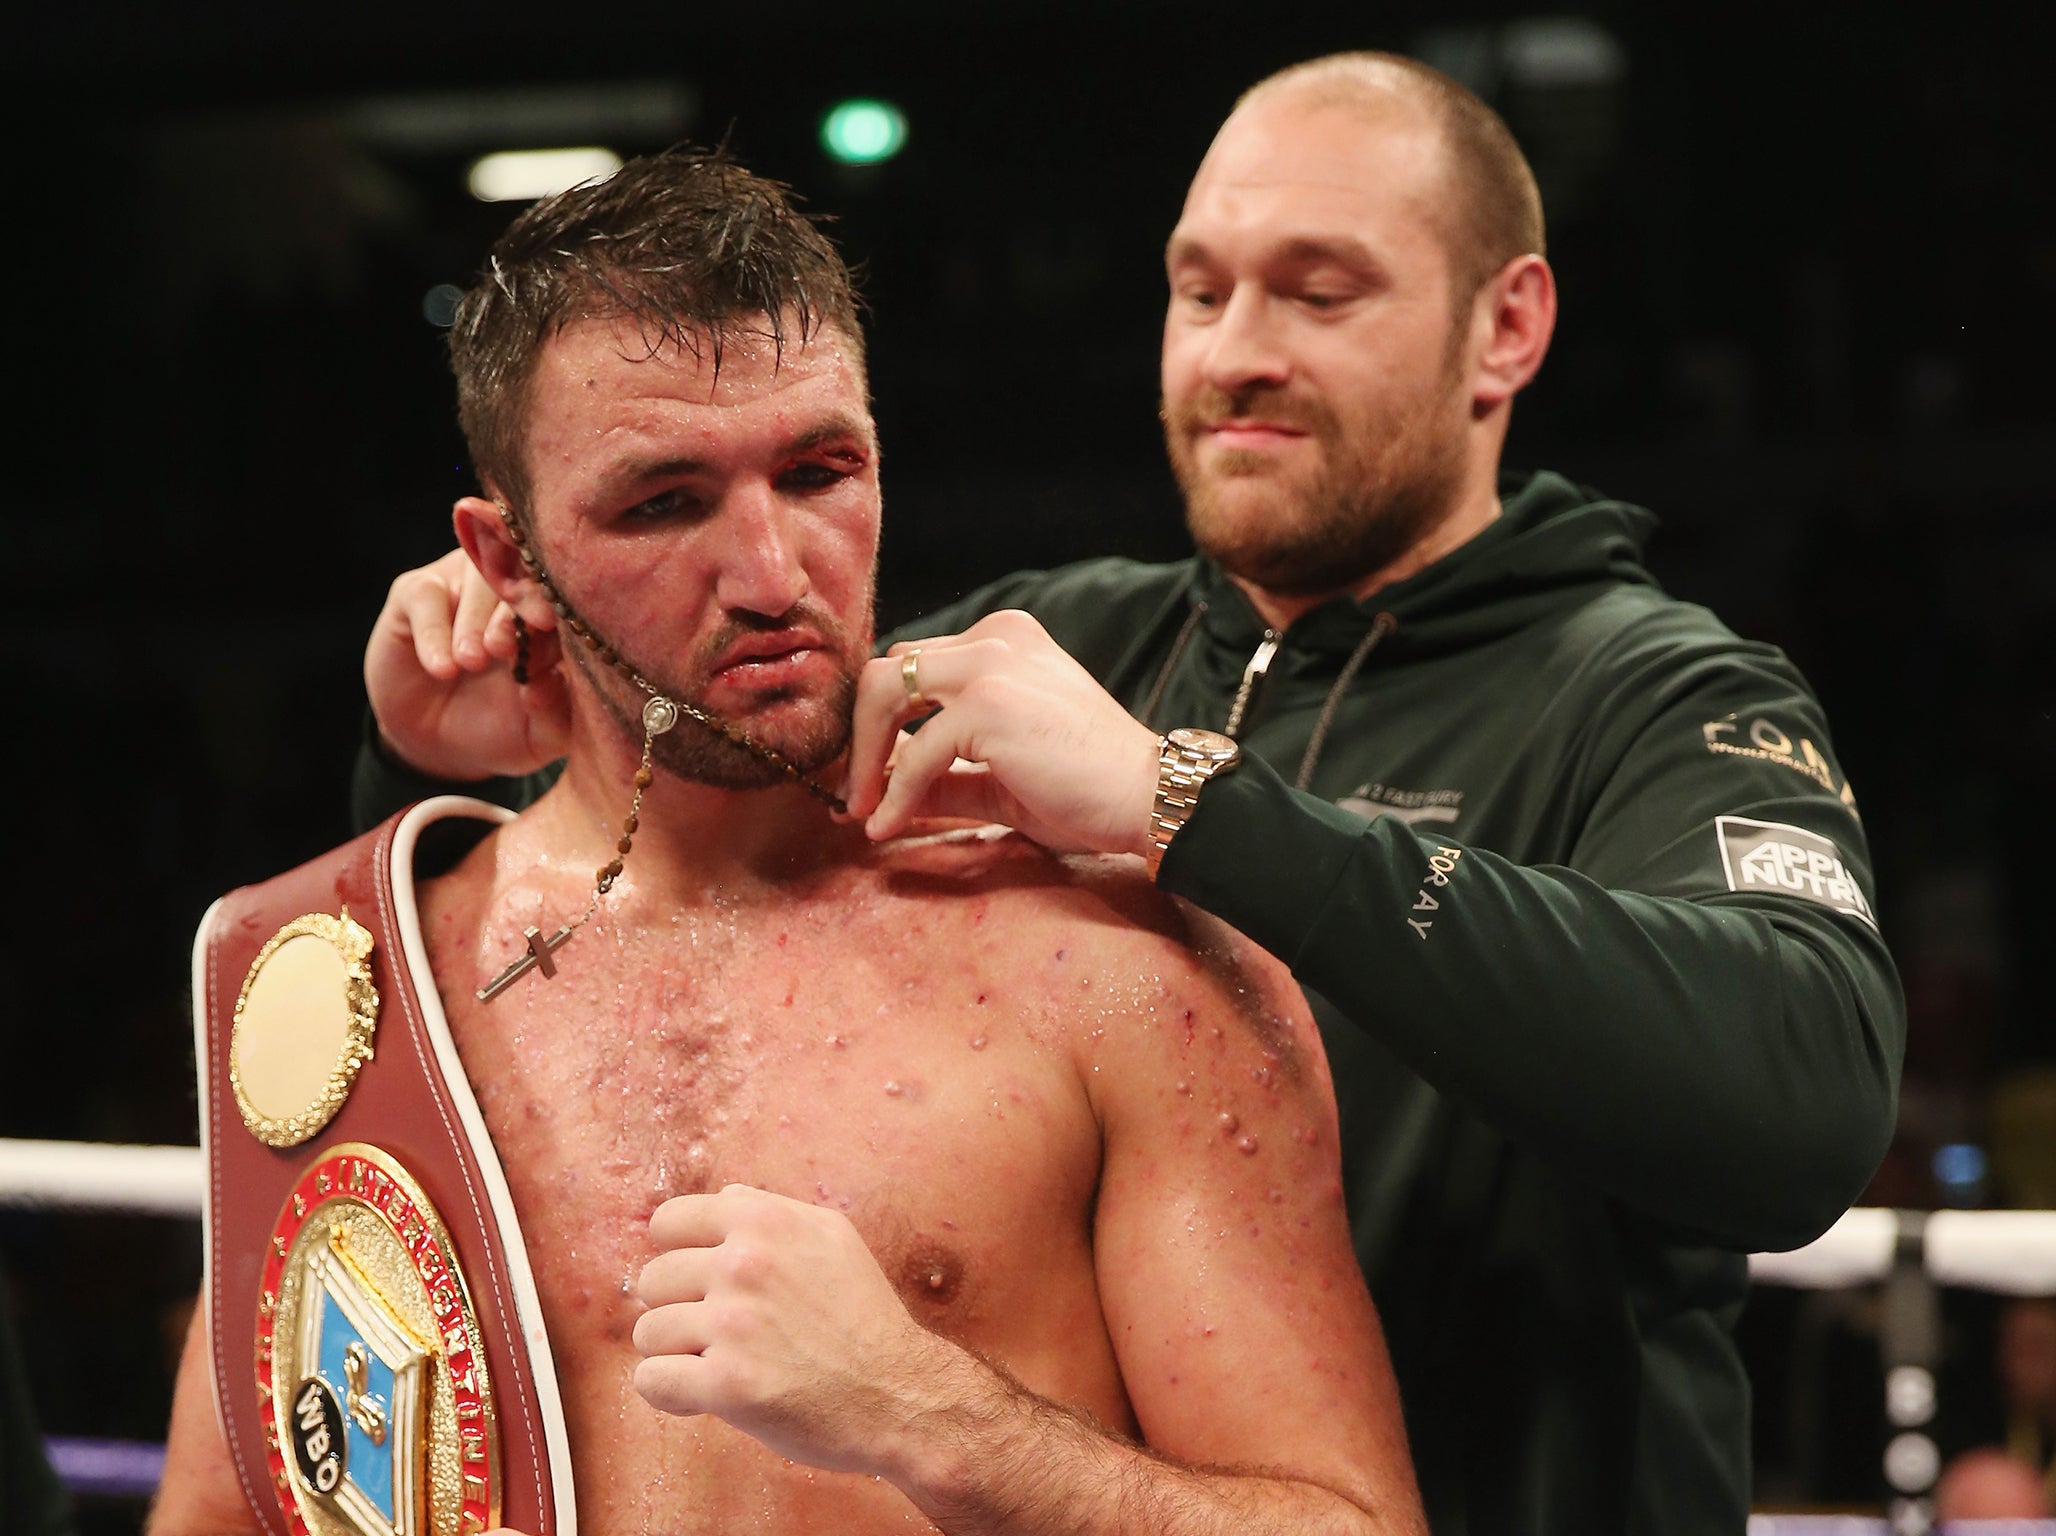 Hughie Fury suffered from acne conglobata